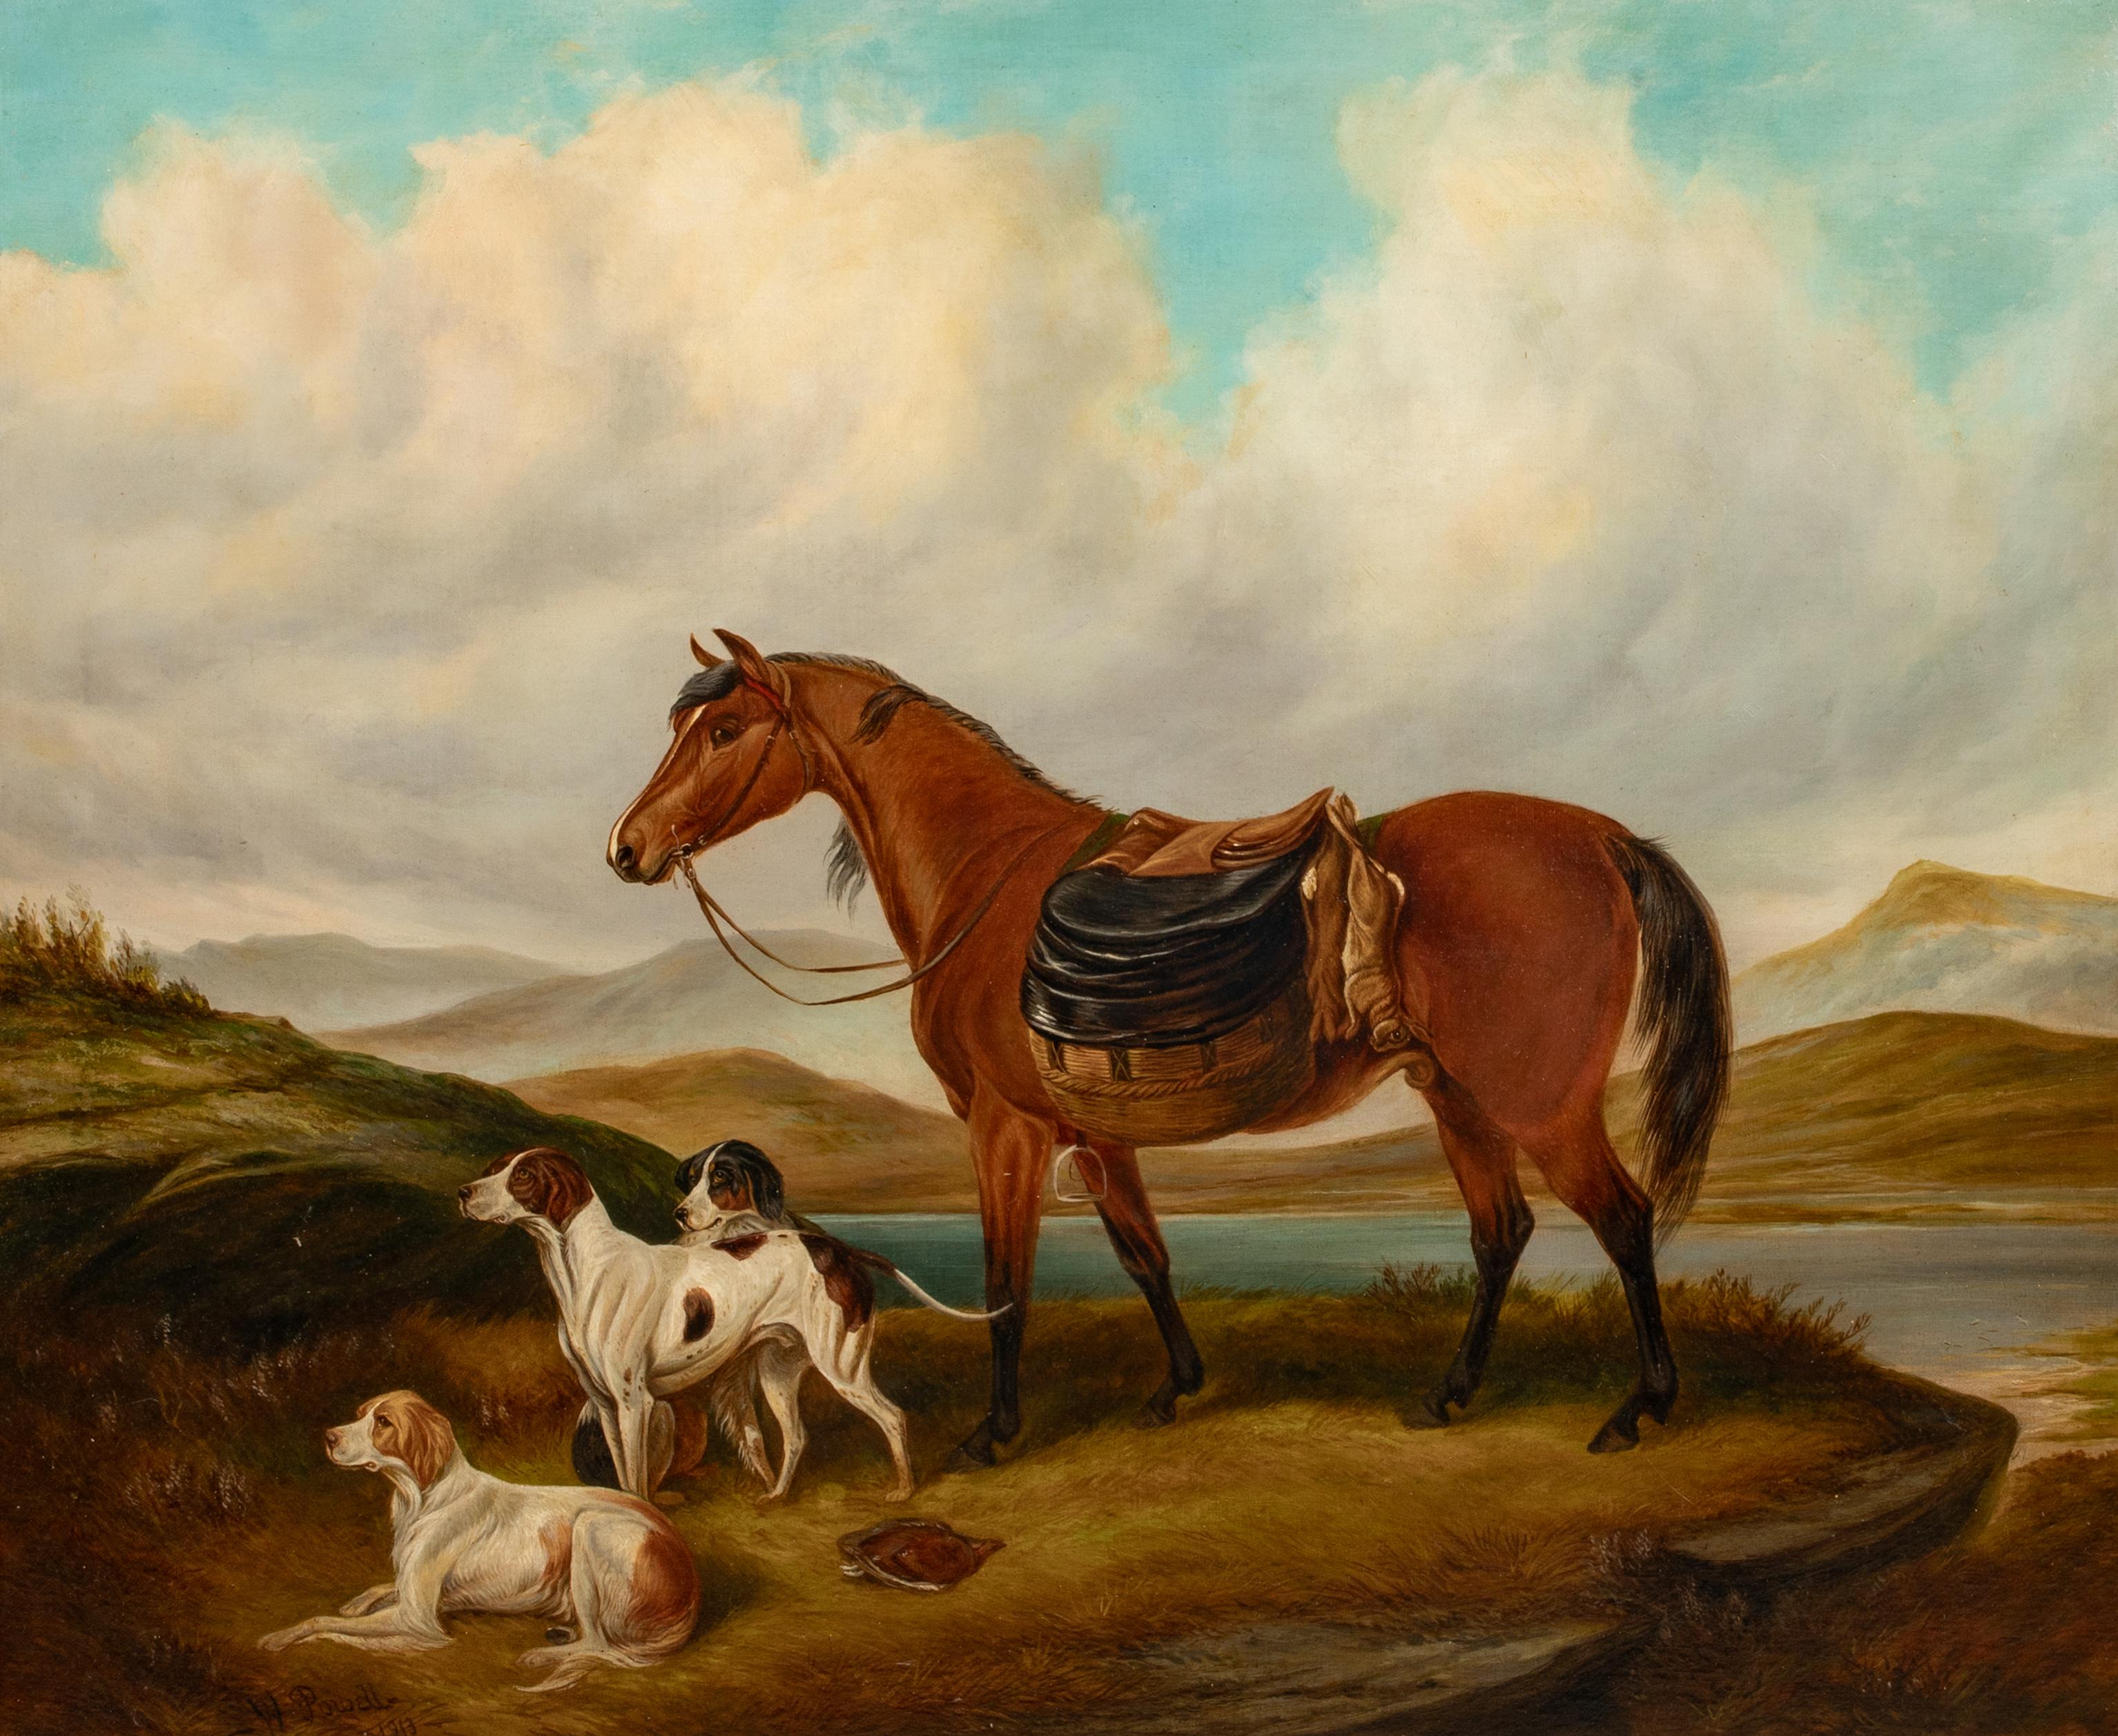 Horse and Dogs in a Highland Landscape, dated 1913

by William E. POWELL (1878-1955)  

Large 1913 Scottish Highland scene of a horse and hounds in a landscape, oil on canvas by William Powell. Excellent quality and condition, signed and dated.